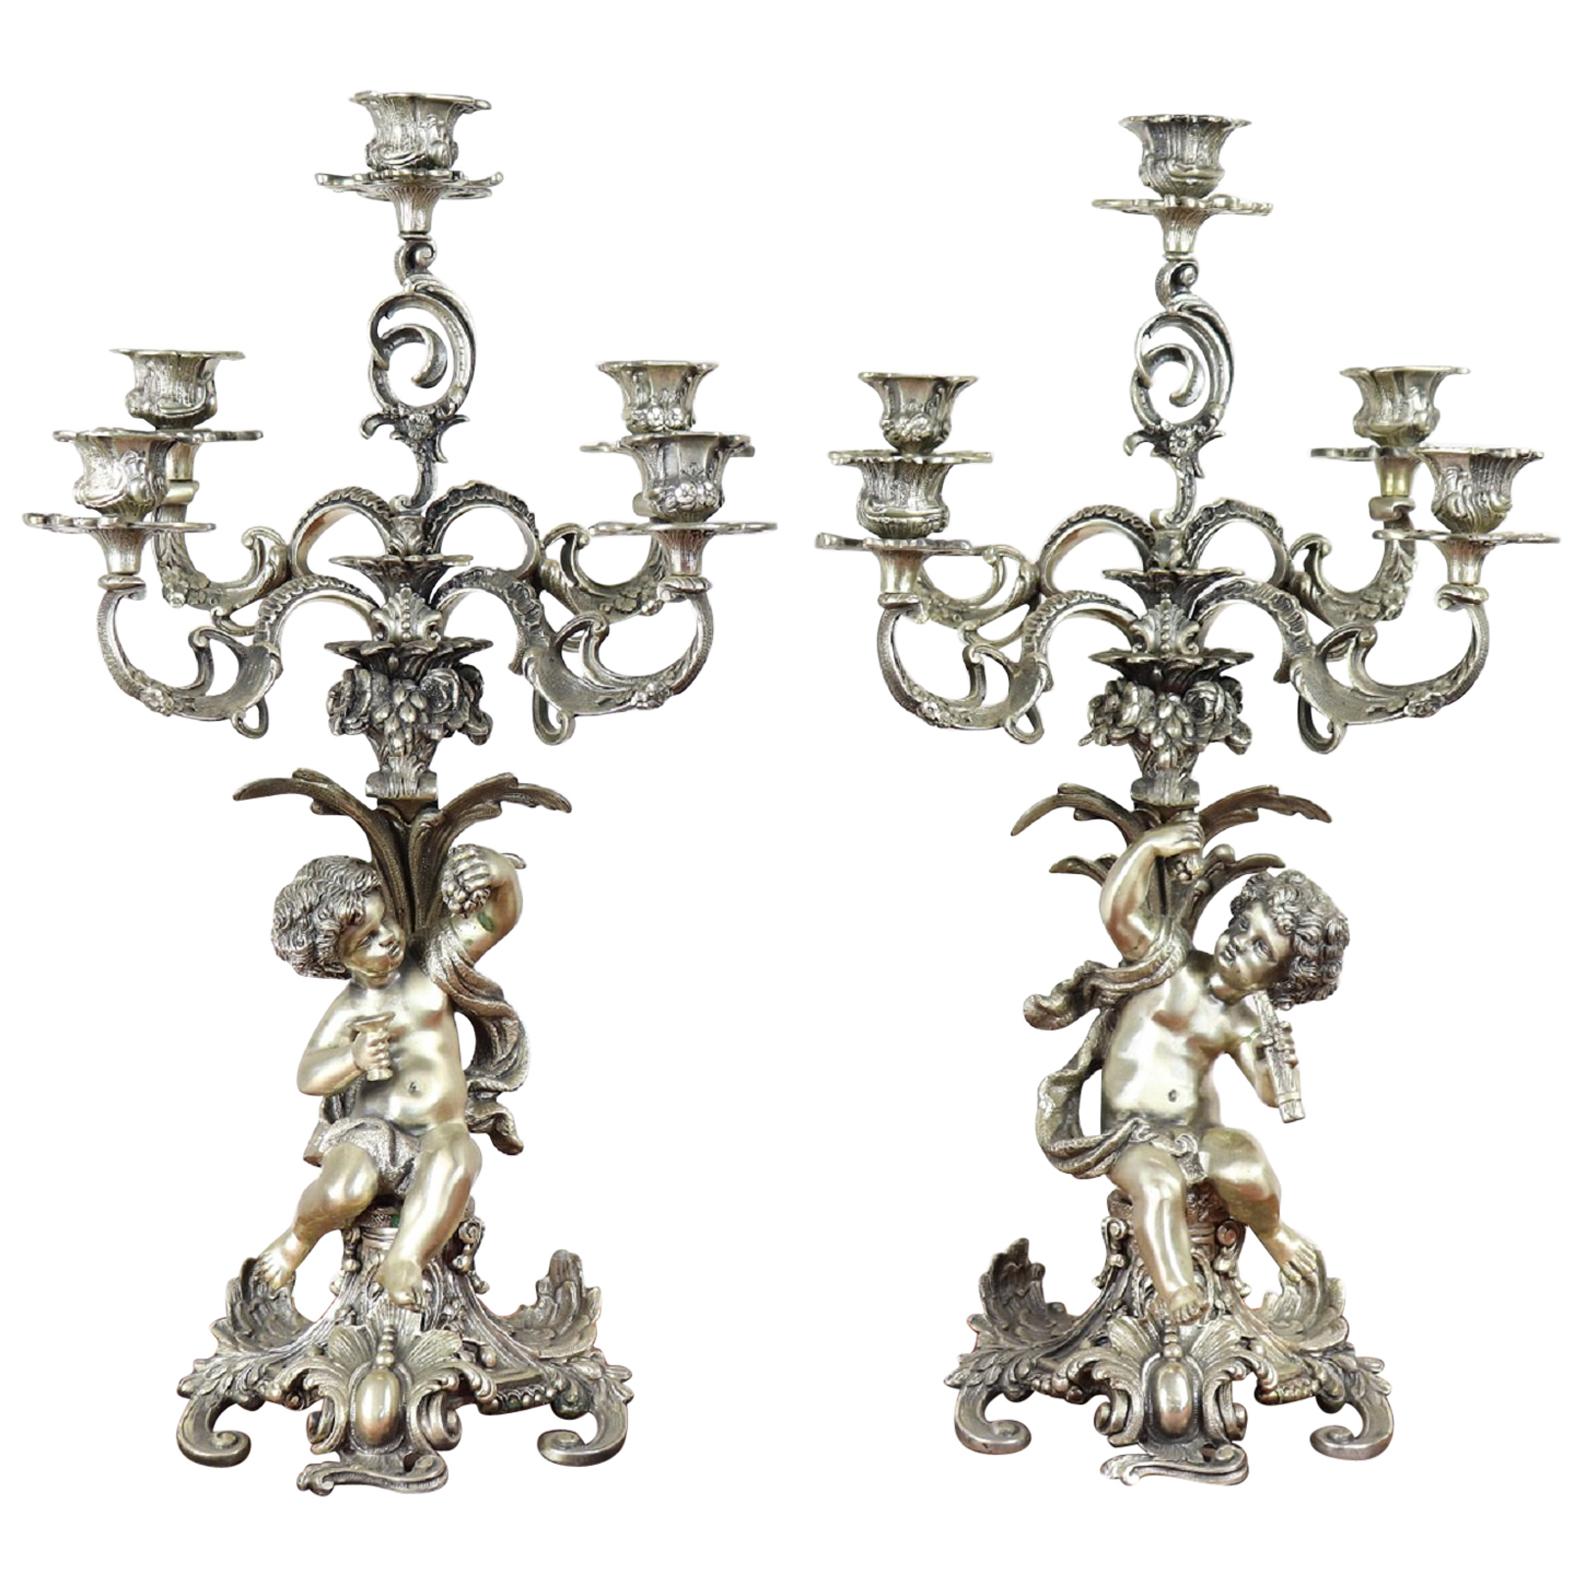 20th Century Italian Baroque Style 800 Silver Pair of Candelabras with Cherubs